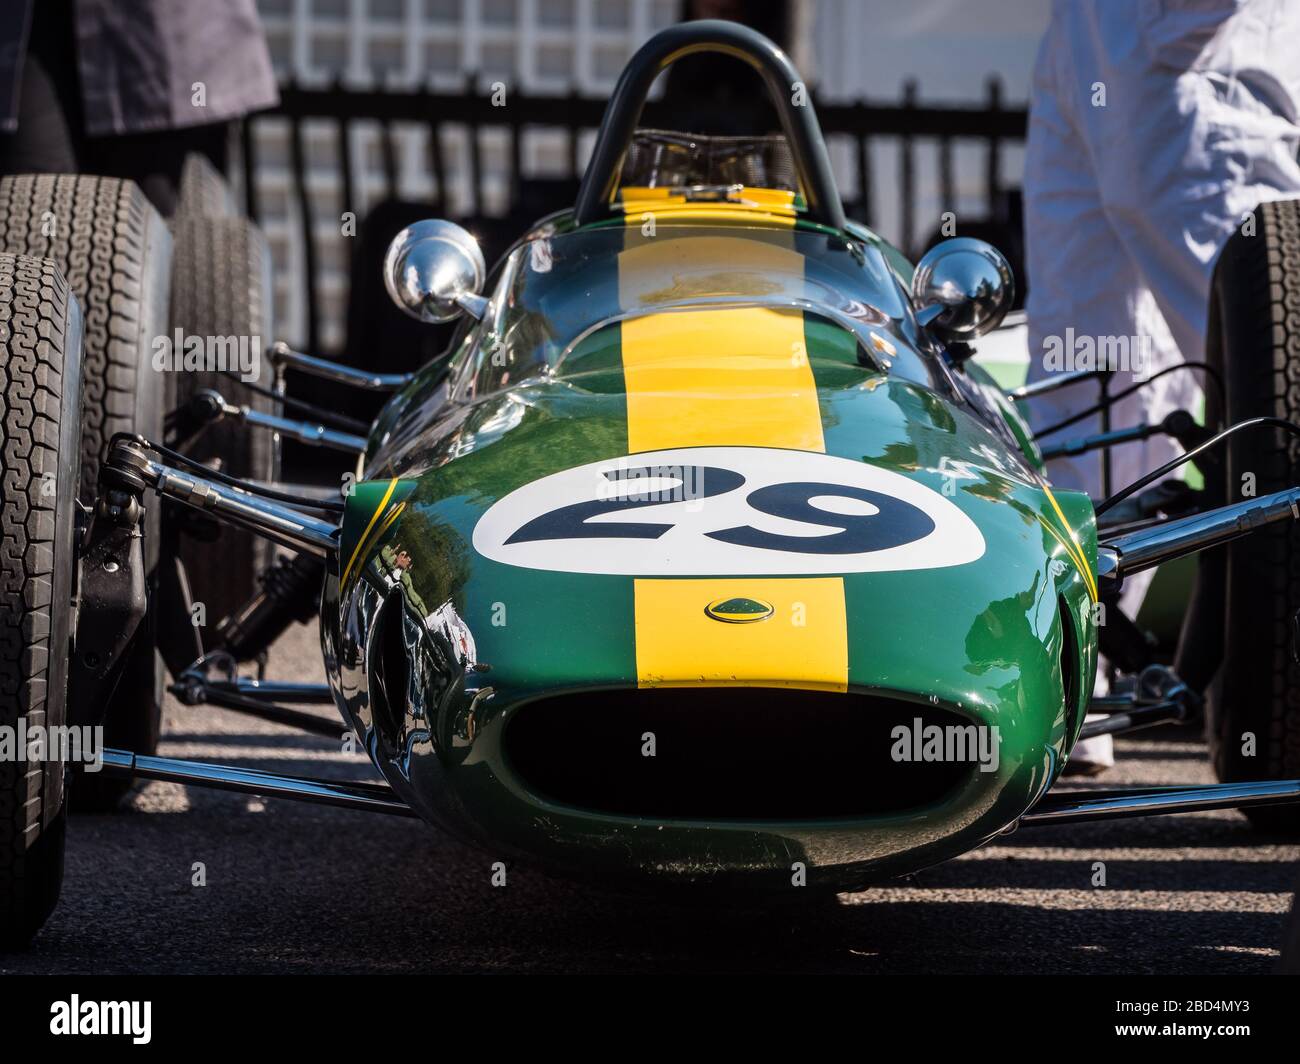 1962 Lotus Climax 25 racing car, Goodwood Revival 2019 West Sussex UK Stock Photo